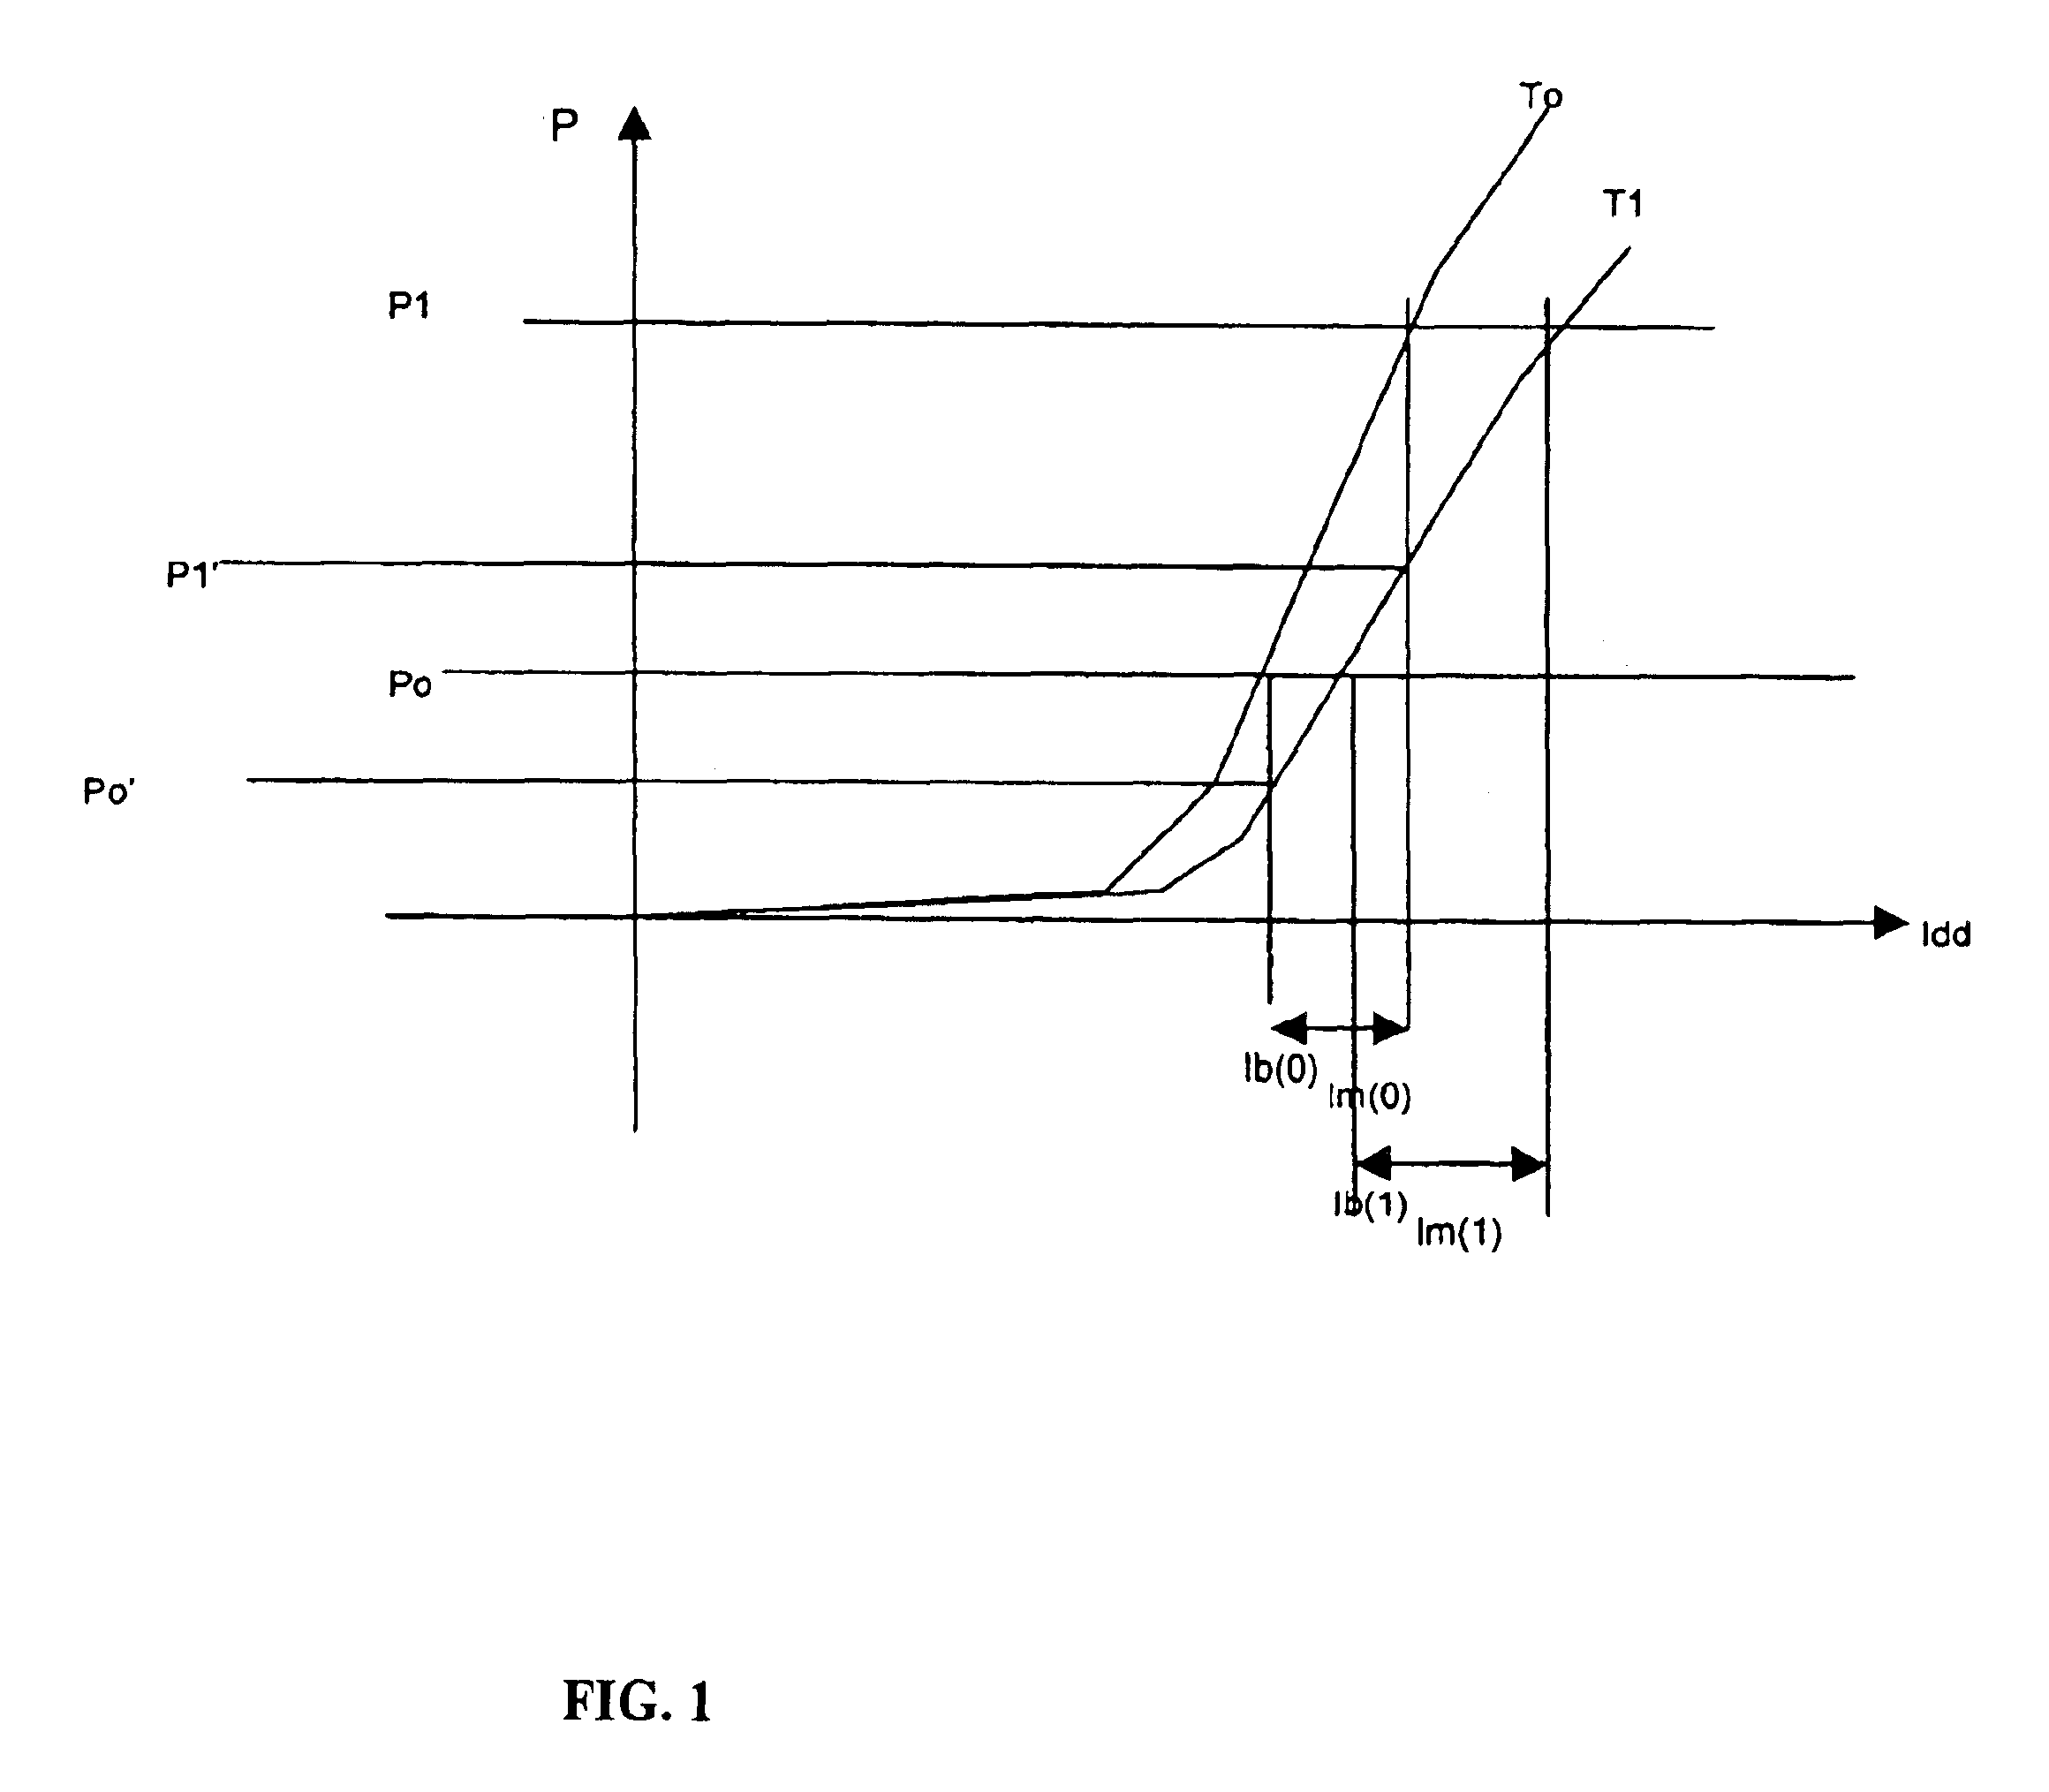 Statistic parameterized control loop for compensating power and extinction ratio of a laser diode